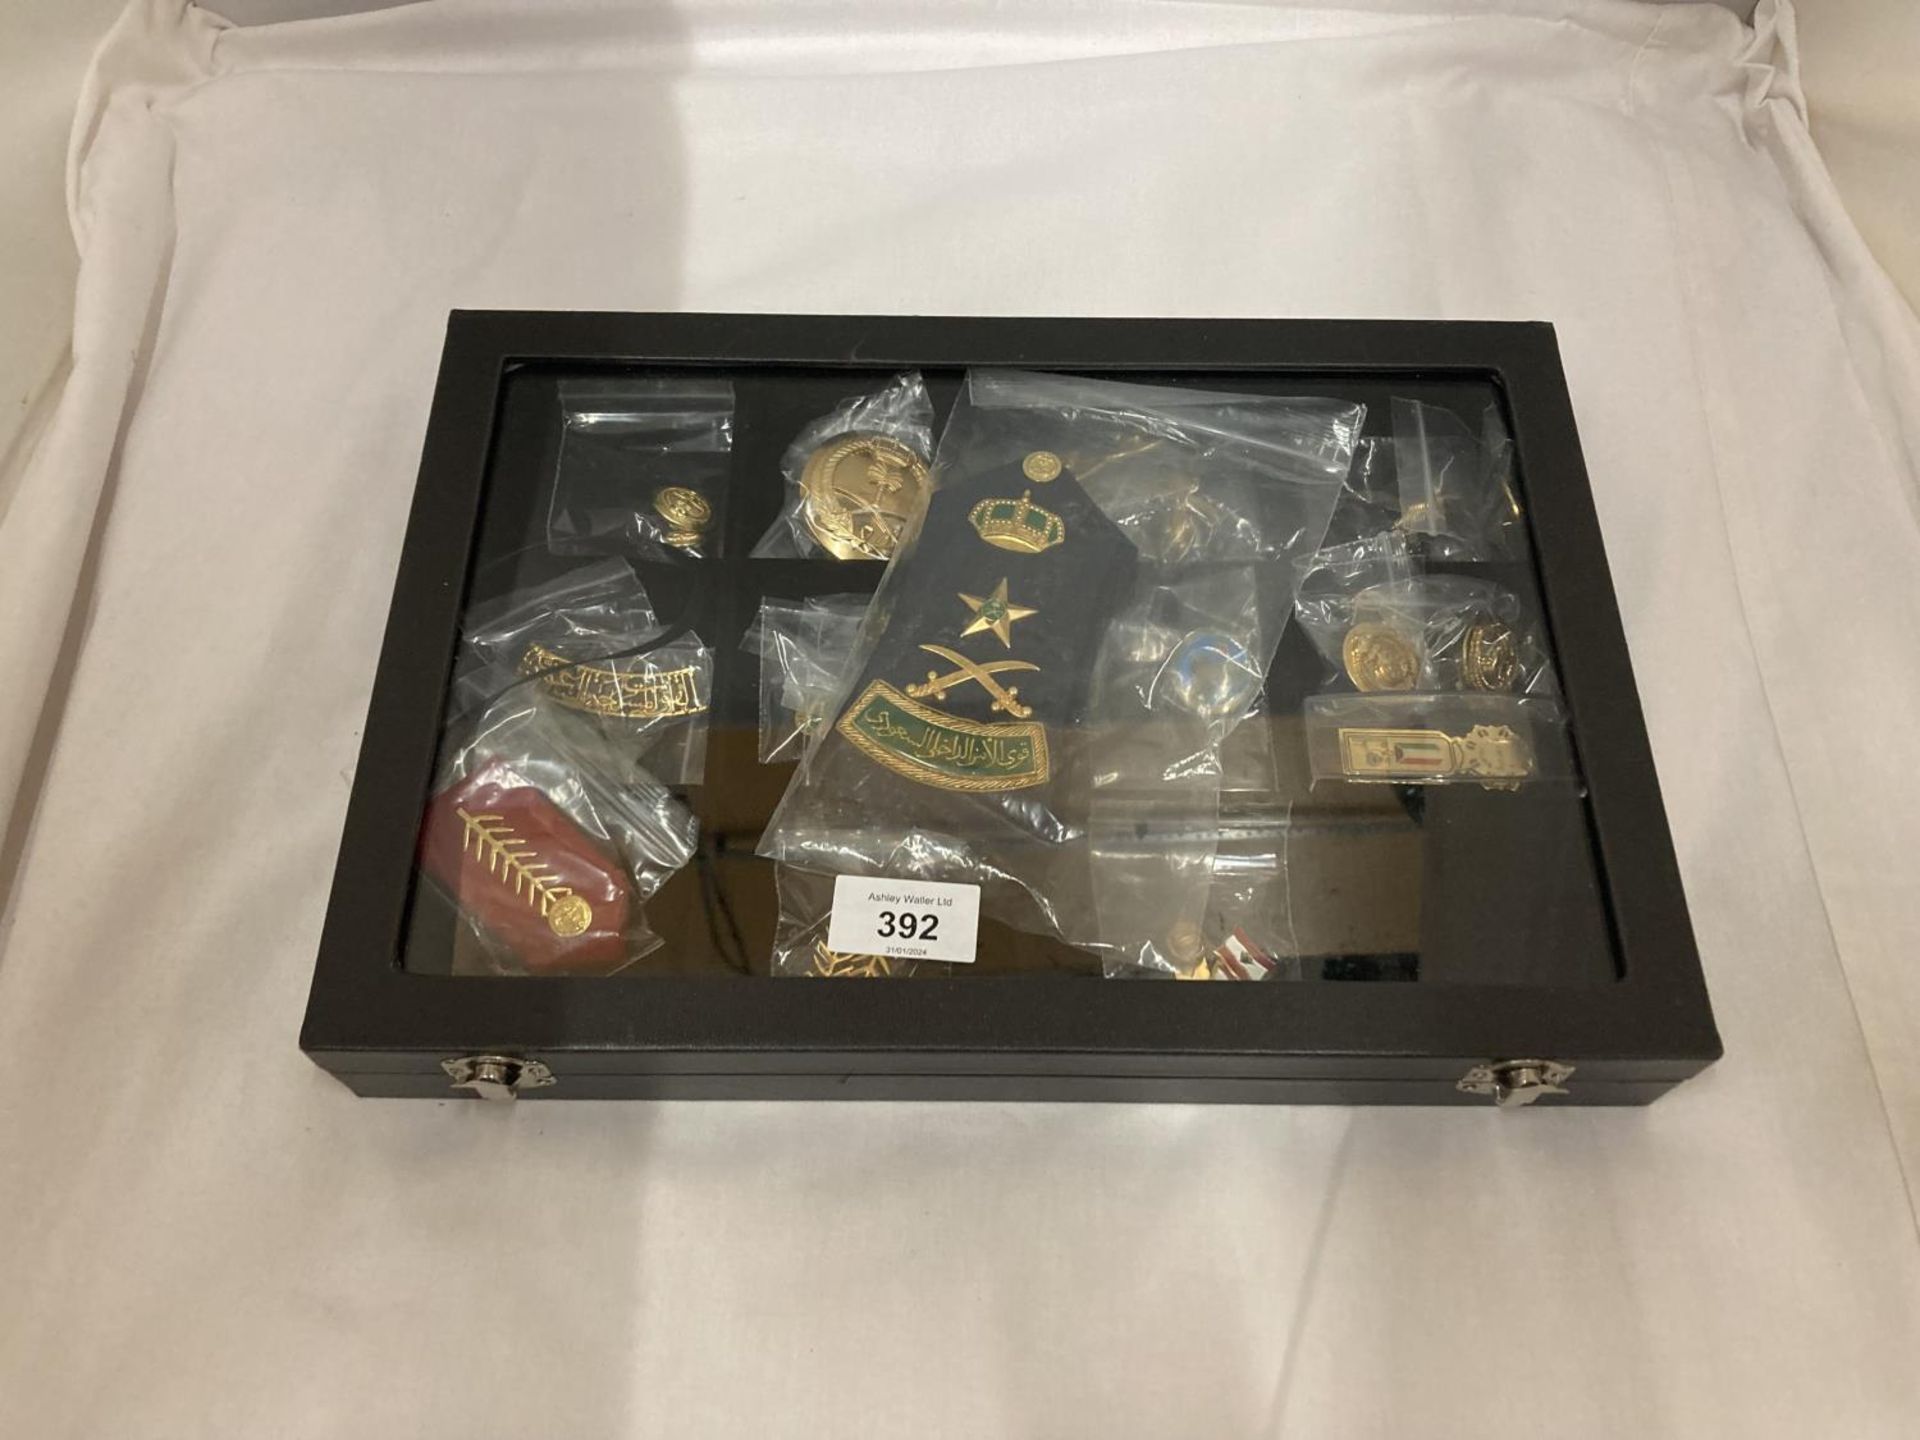 A DISPLAY CASE CONSTAINING TWENTY FIVE GULF MEDALS AND BADGES INCLUDING A PAIR OF SAUDI ARMY